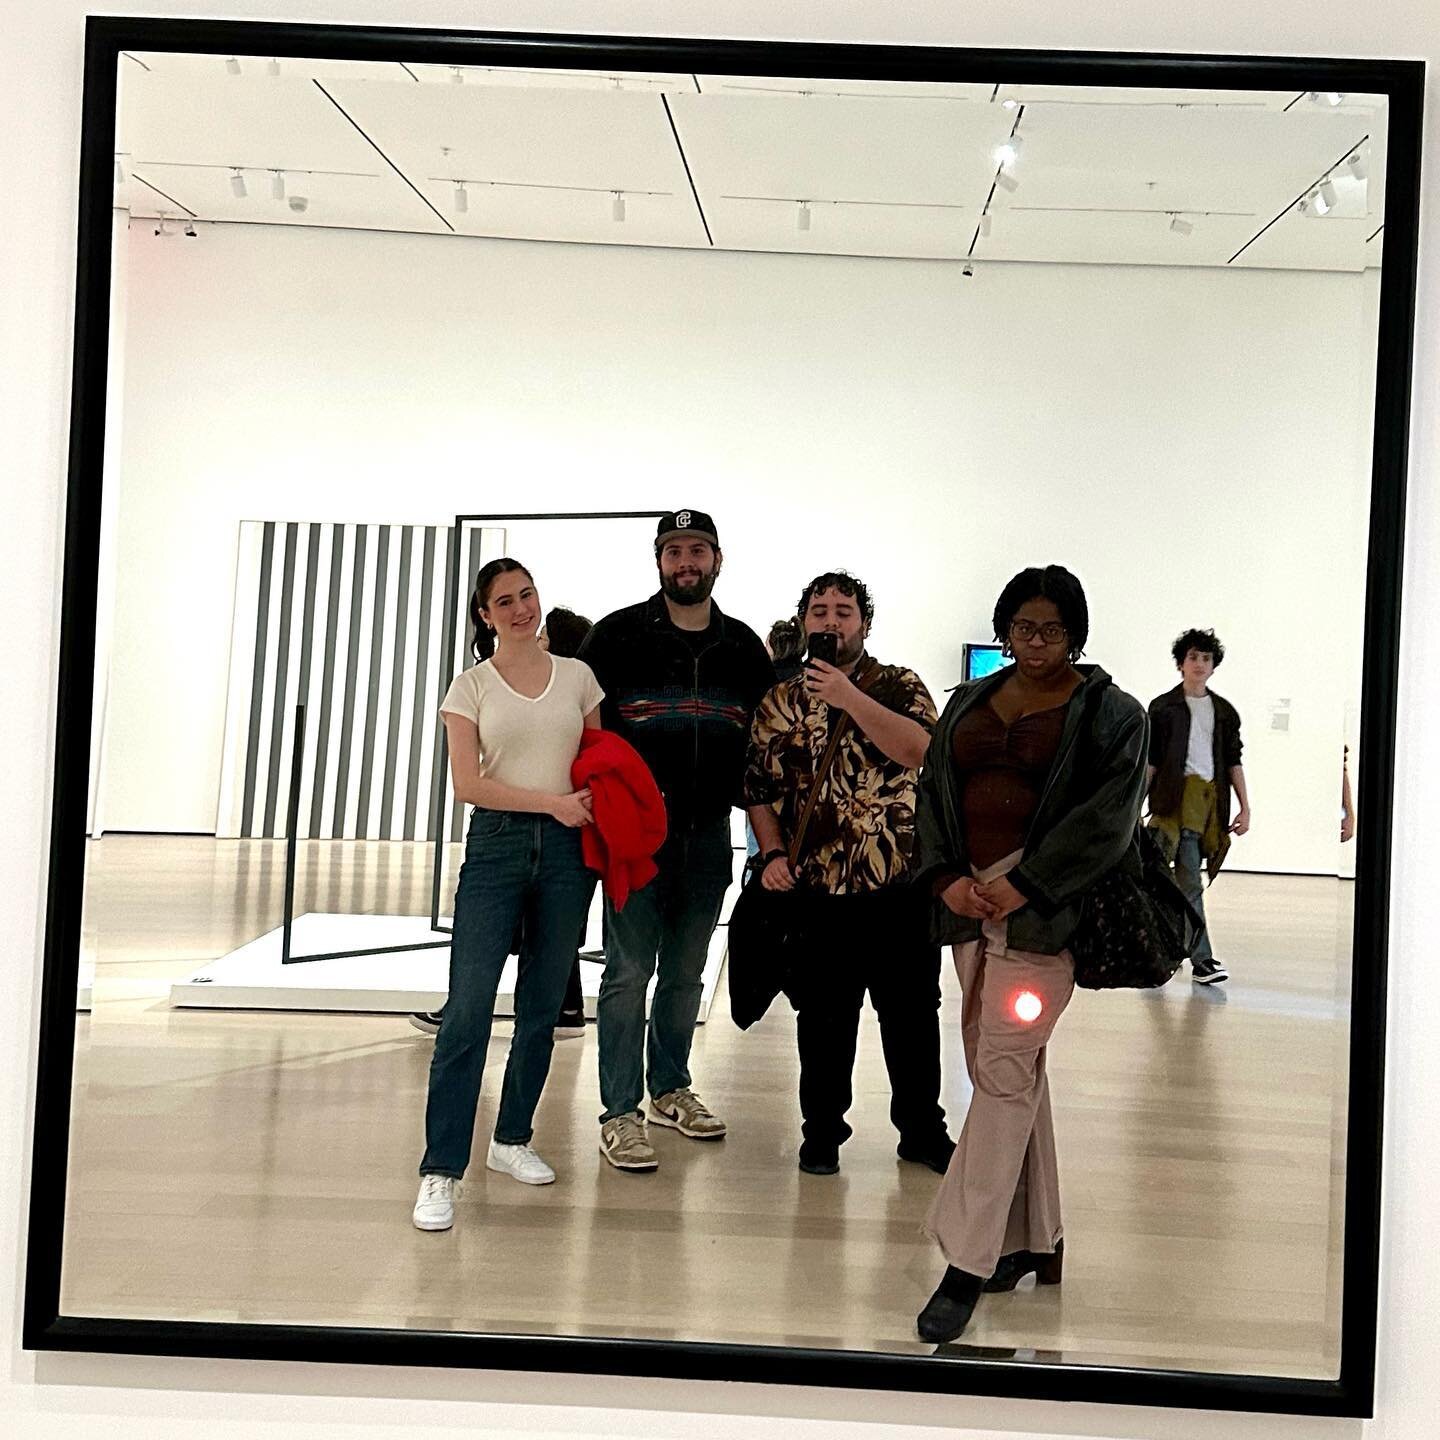 Being cultured at @themuseumofmodernart 🎨🖼️

#nyc #newyorkcity #moma #museumofmodernart